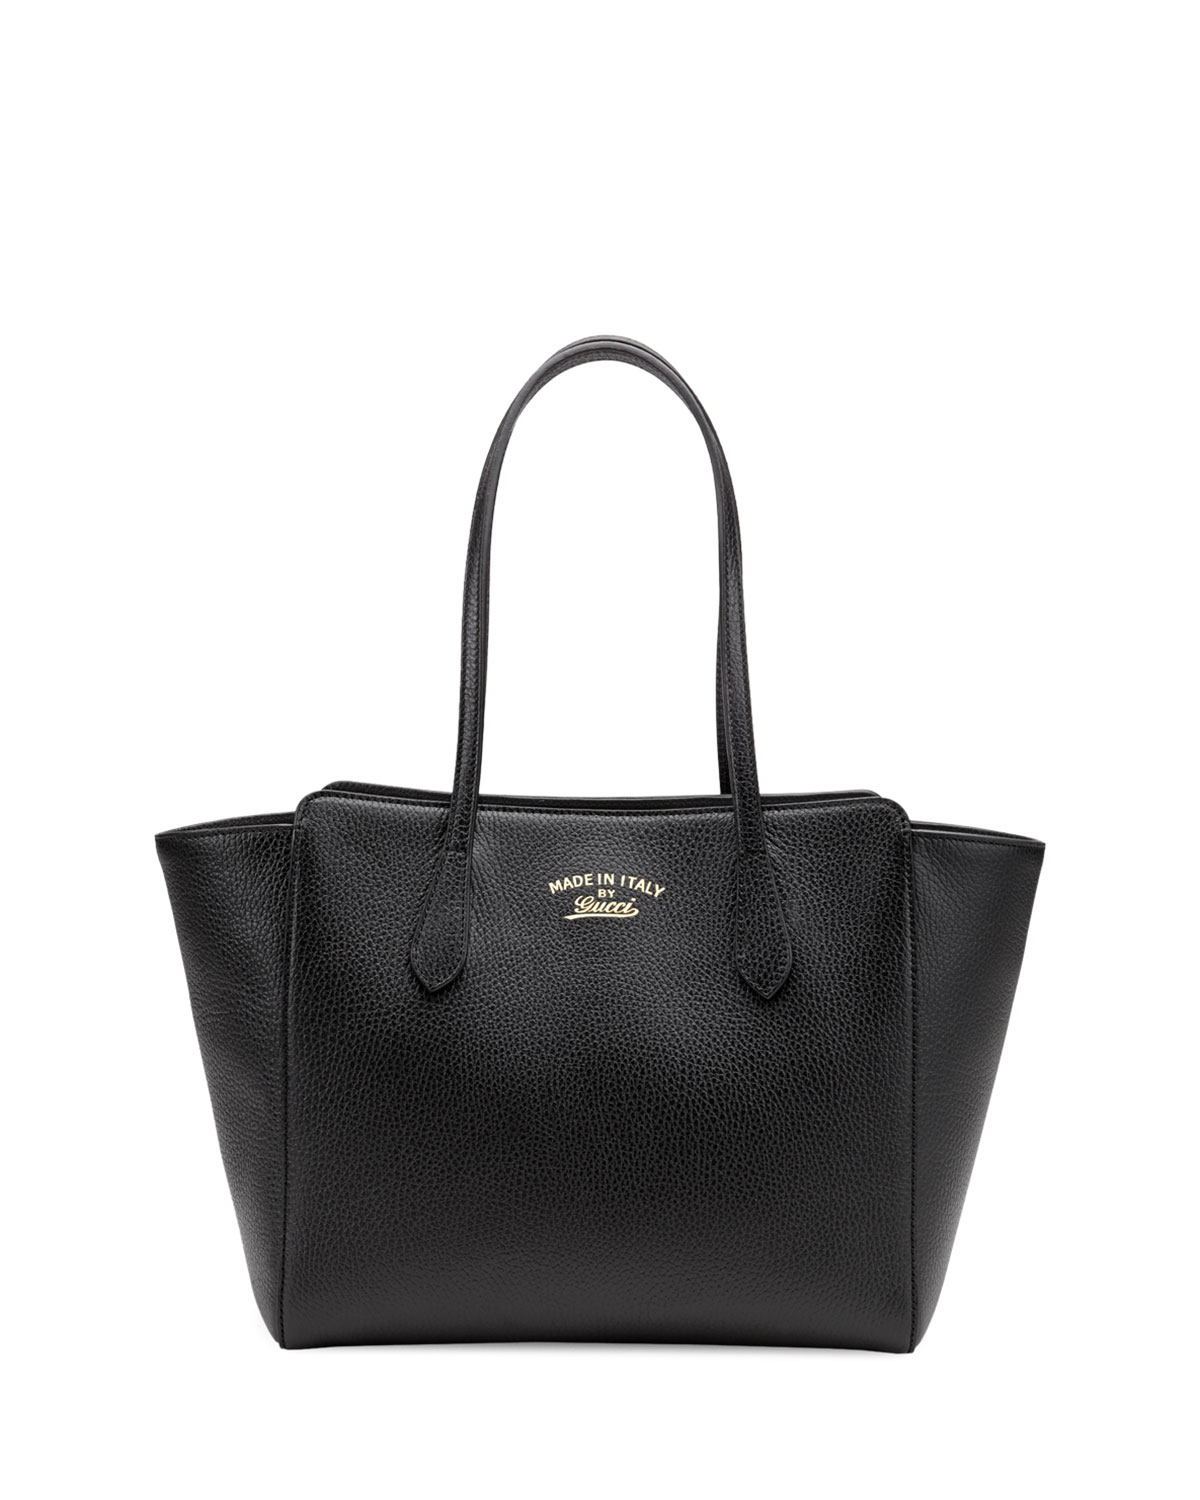 Gucci Swing Small Leather Tote Bag in Black | Lyst